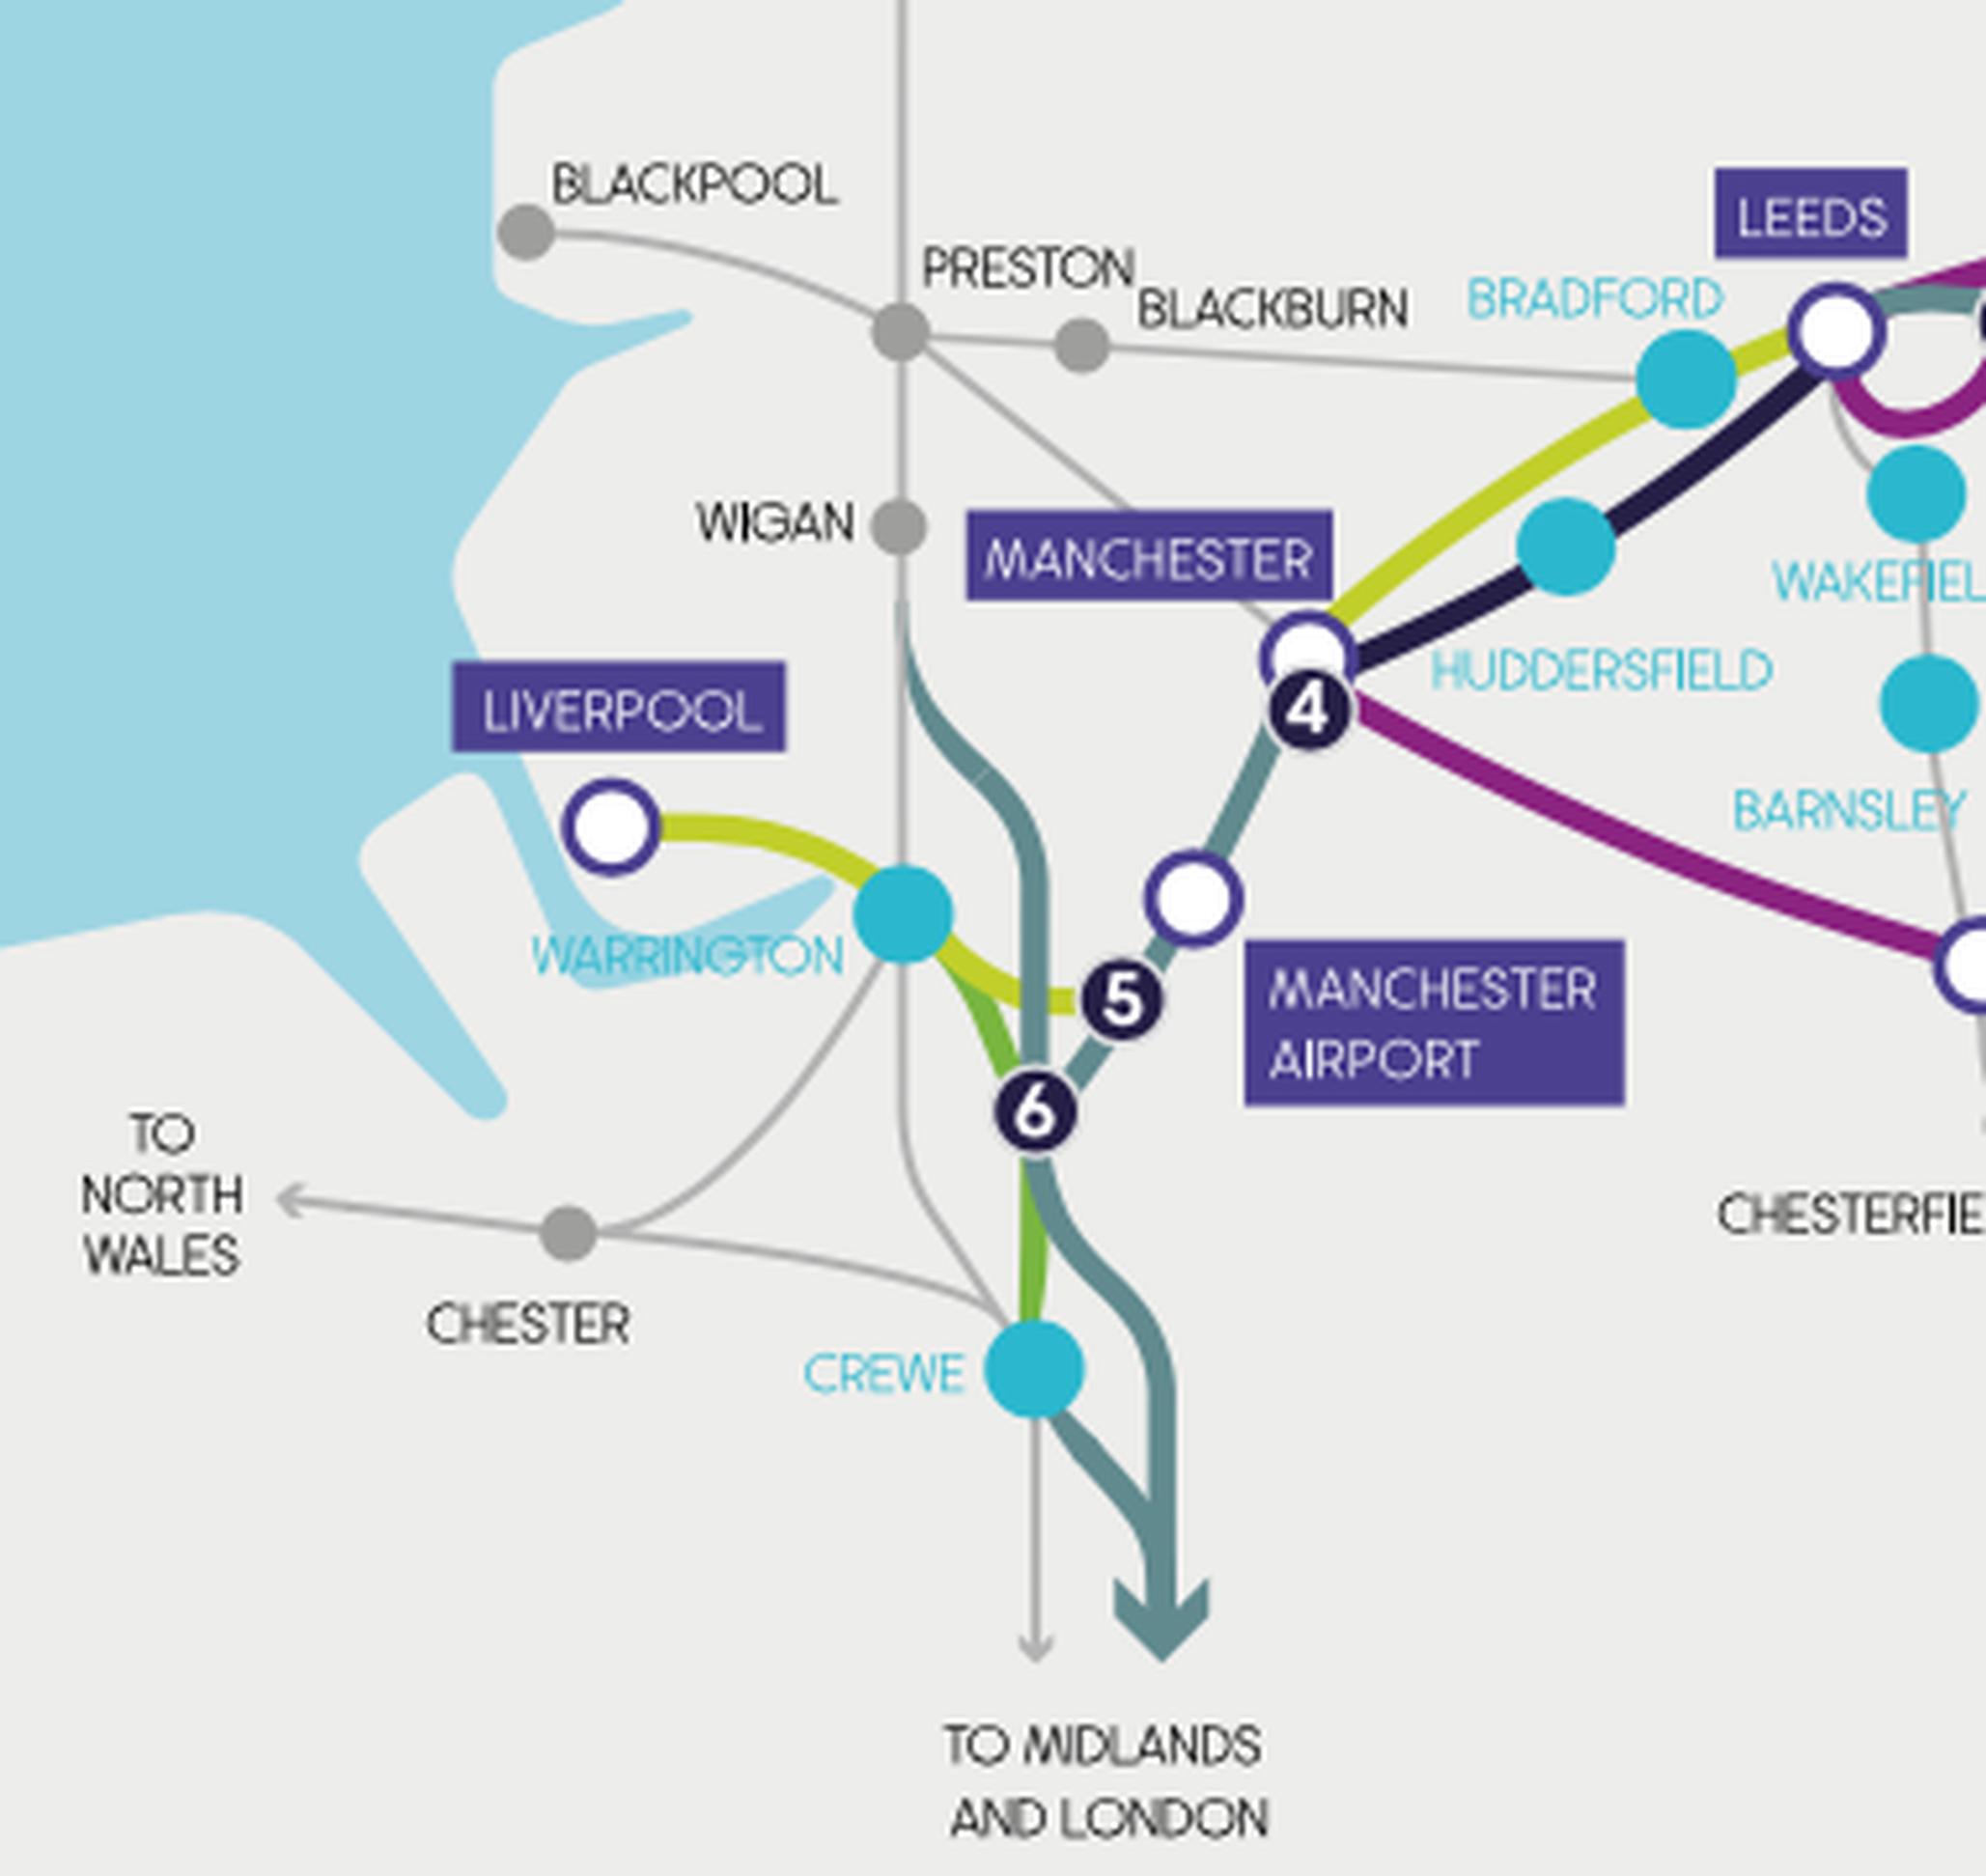 The High Legh junctions are numbered 5 and 6 on this map from Transport for the North. No. 5 would connect Liverpool into HS2 towards Manchester, 6 would connect Liverpool into HS2 towards London